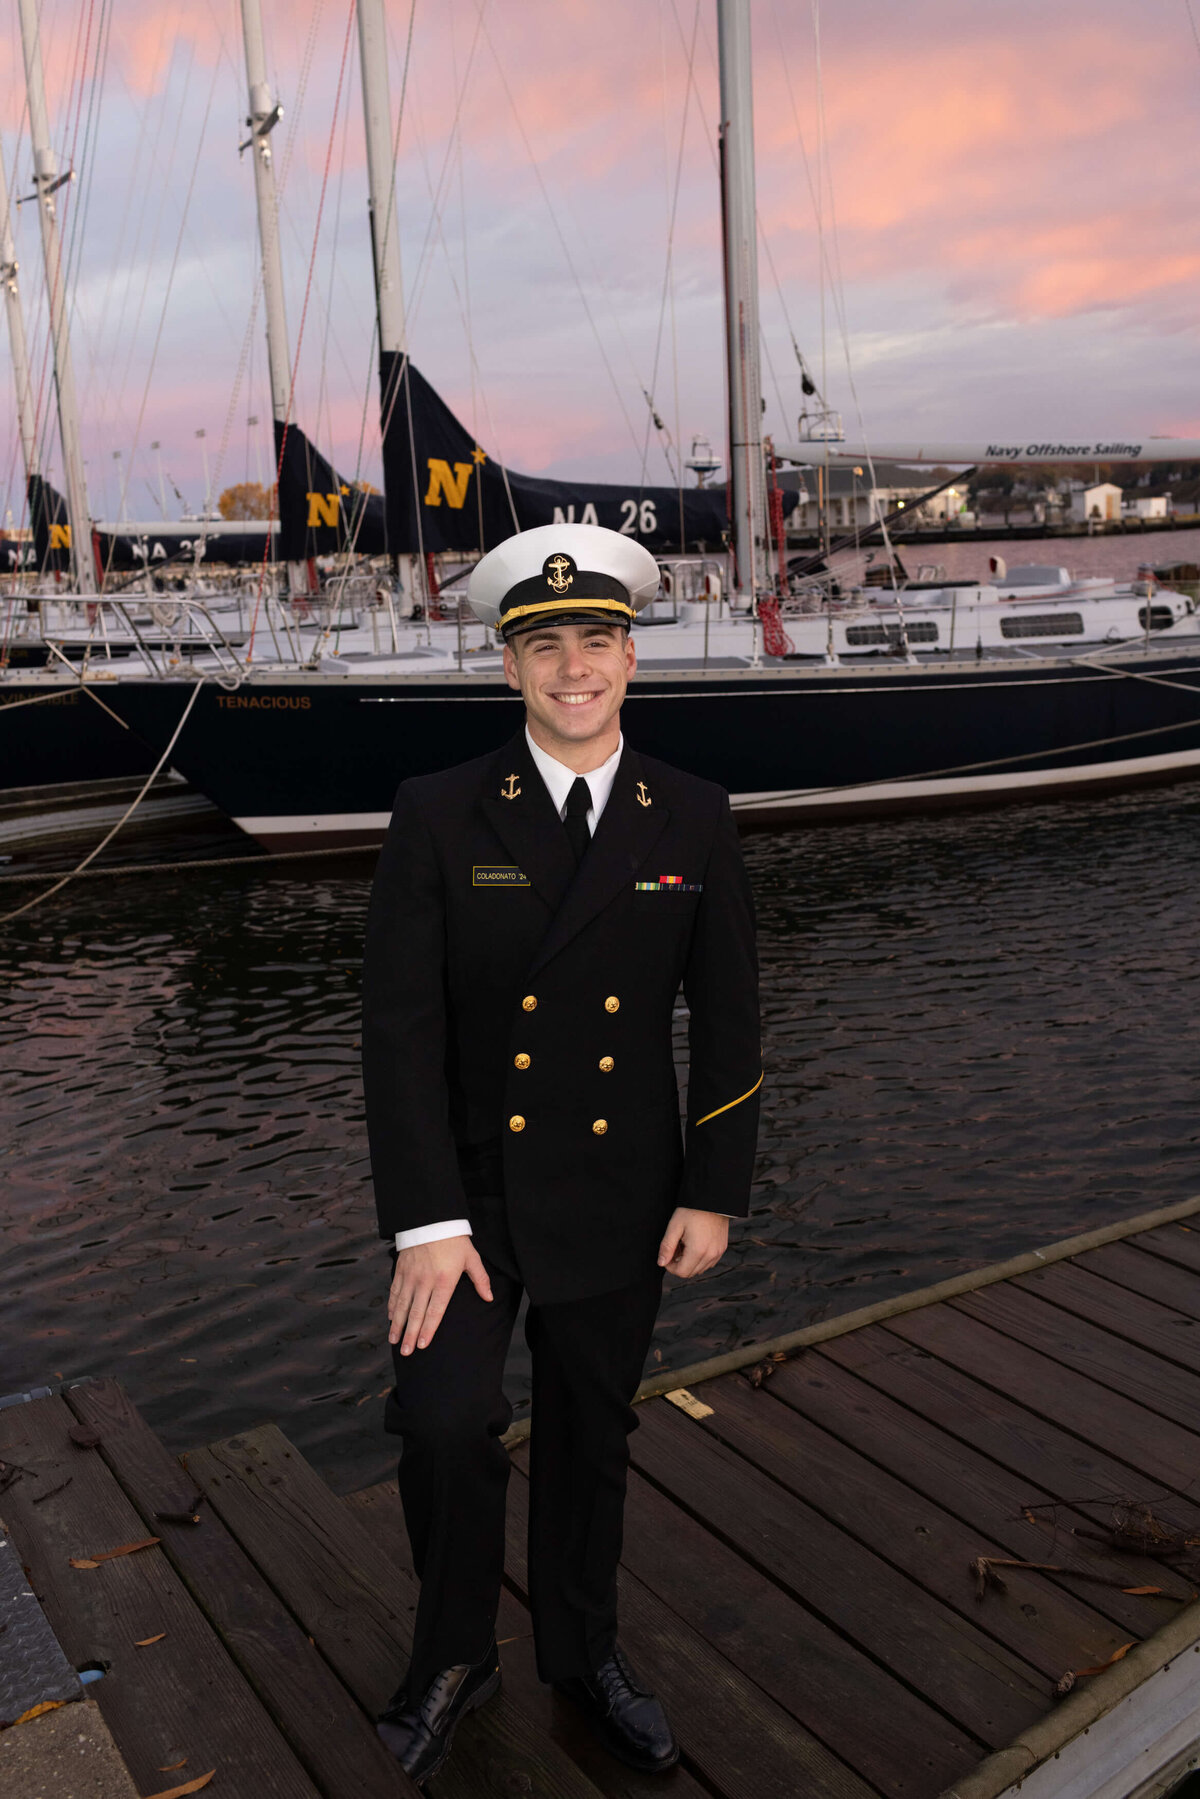 USNA Midshipman in dress blues at sunset on the pier in the Santee Basin at US Naval Academy.